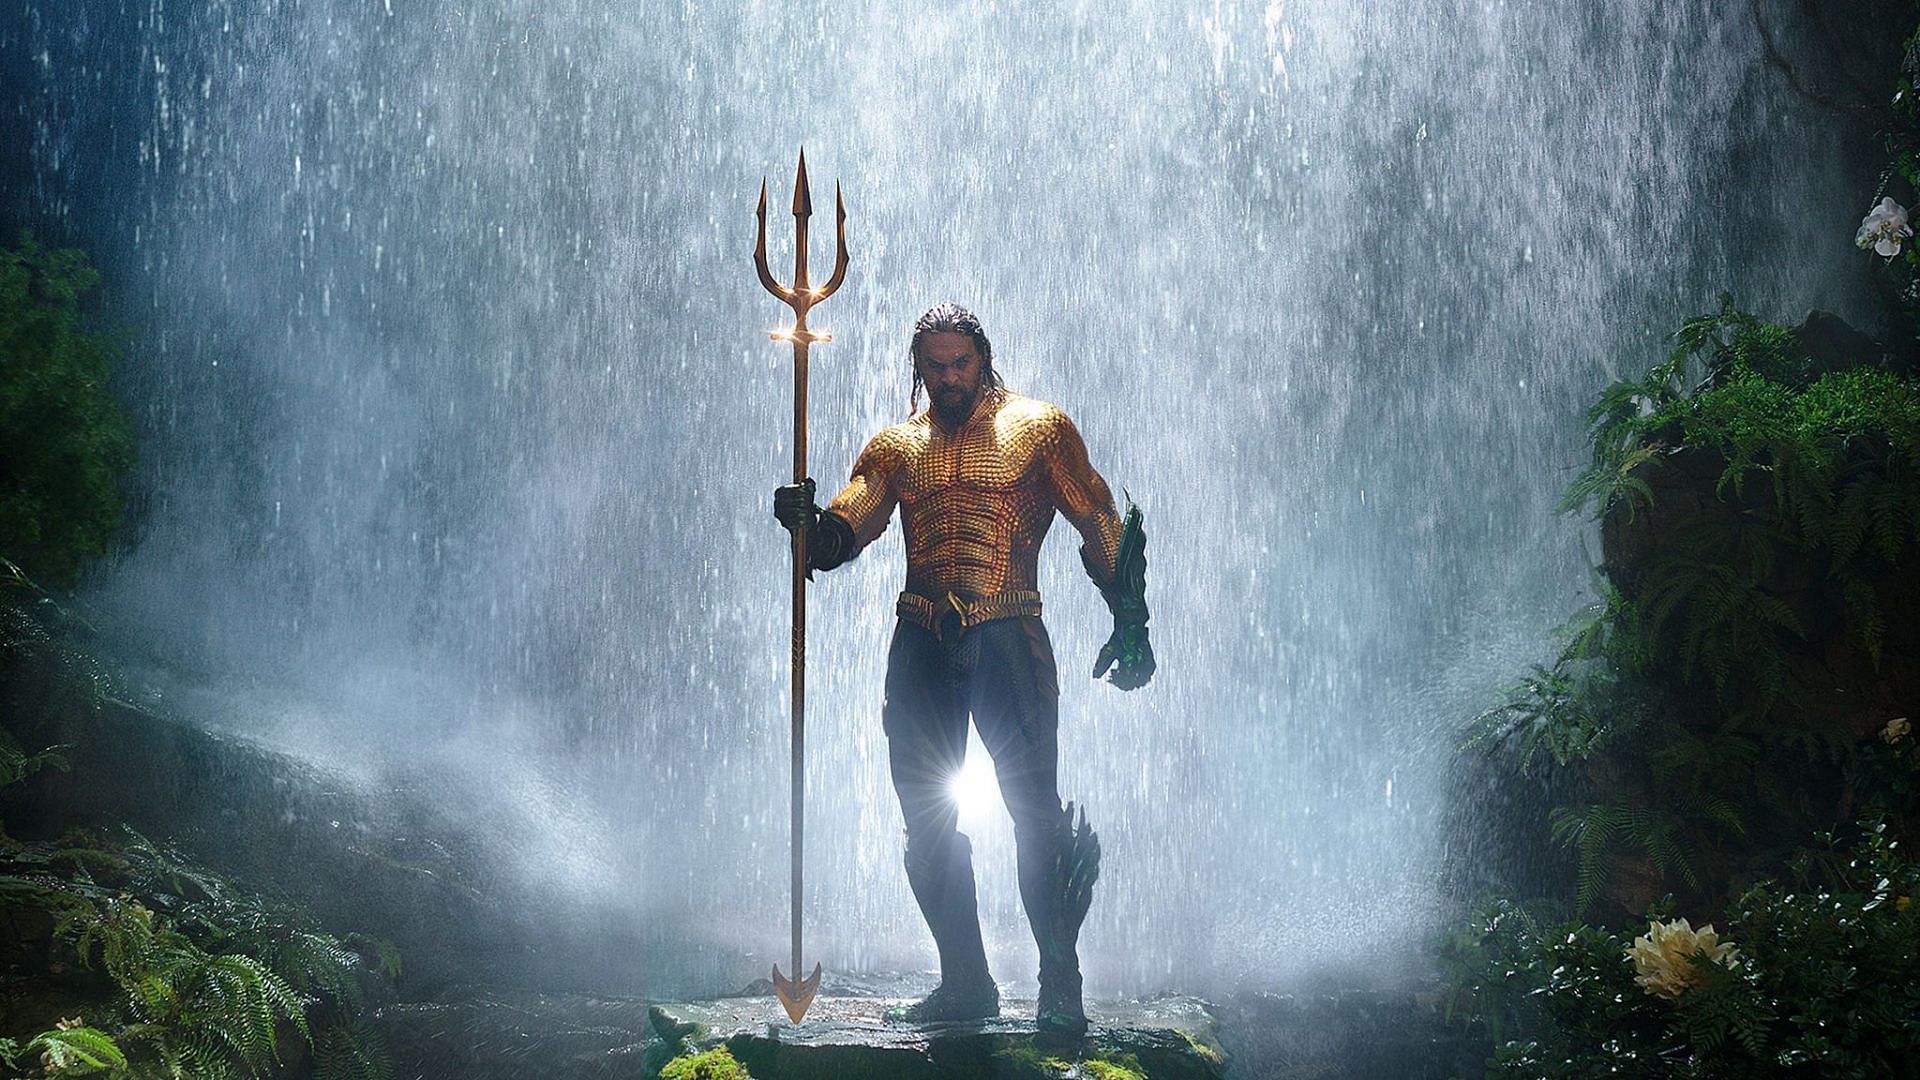 Aquaman 2: The Lost Kingdom - Are Test Screenings Indicating a Disastrous Box Office? (Image via DC Studios)